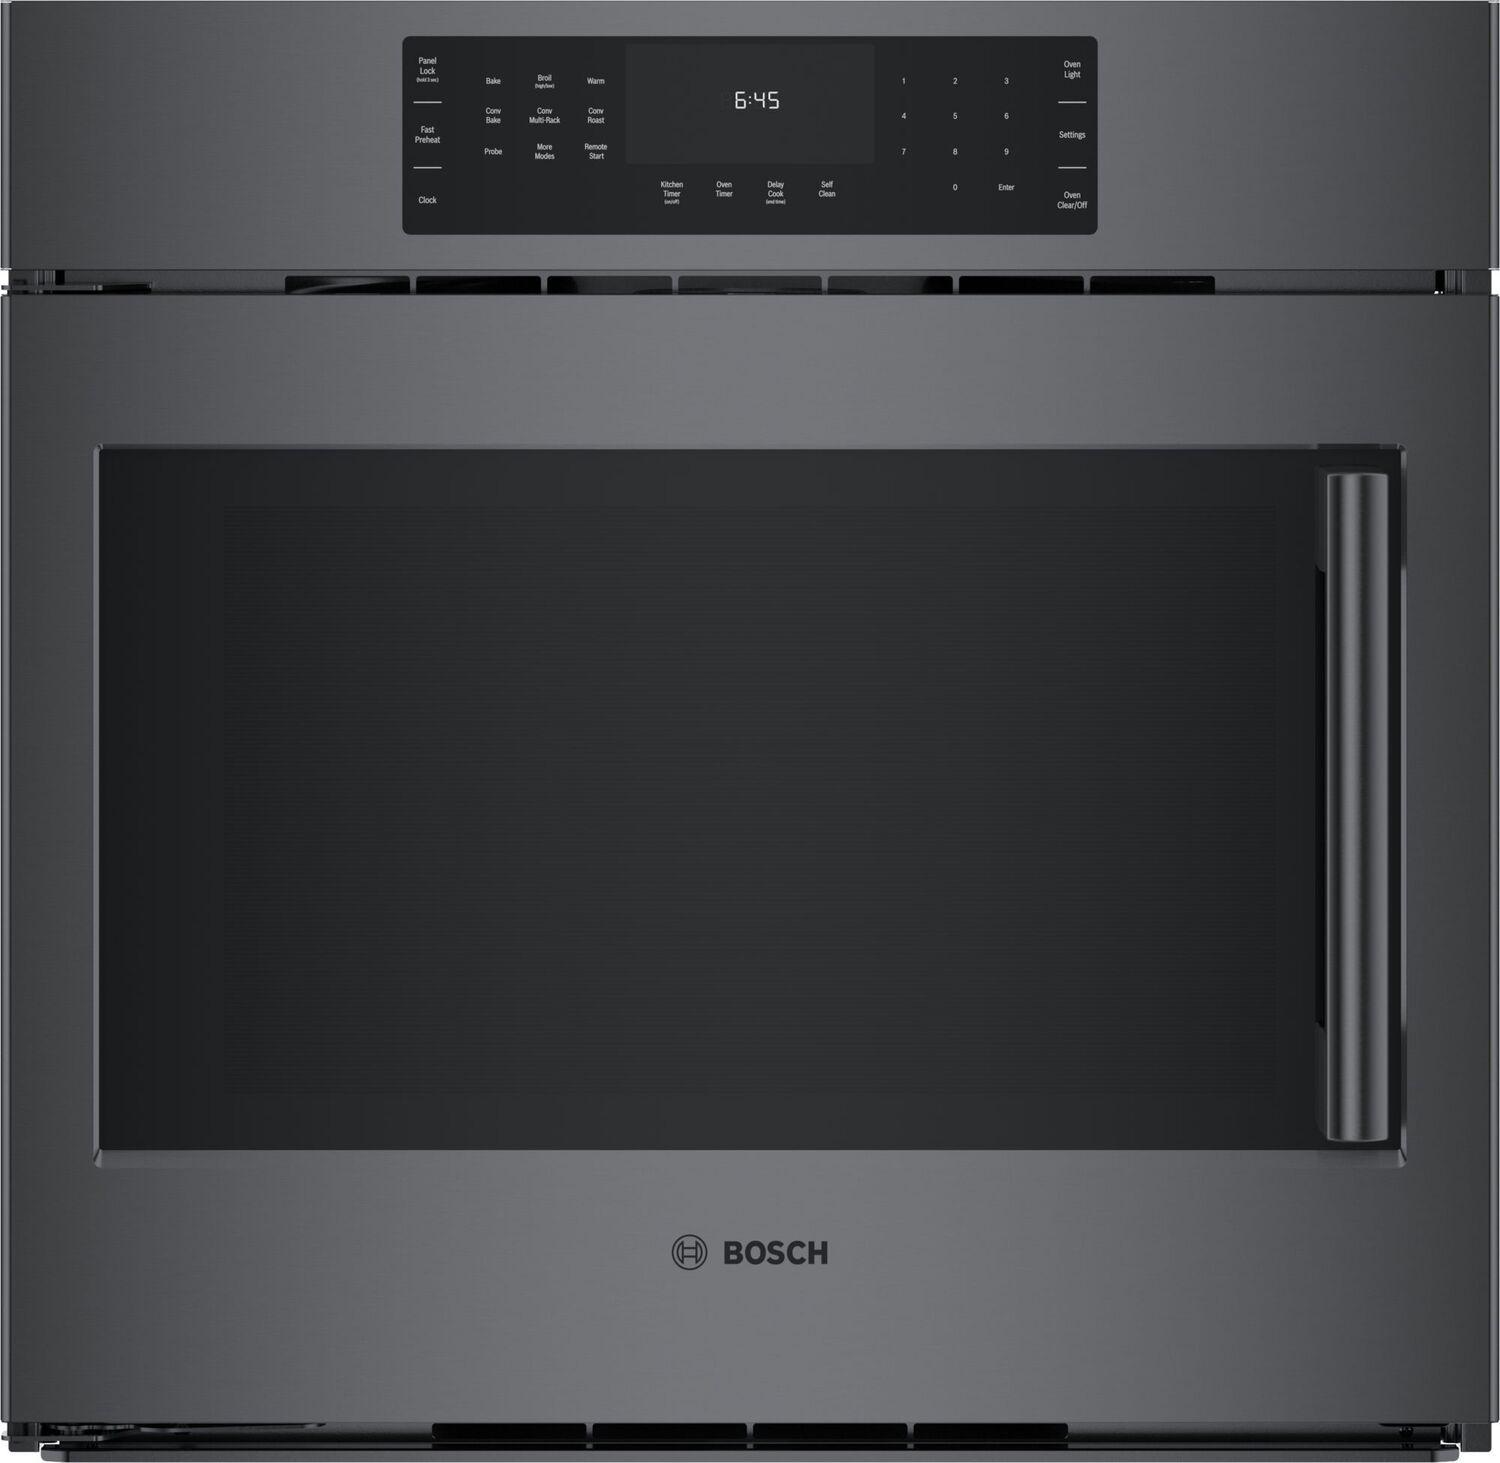 Bosch HBL8444LUC 800 Series Single Wall Oven 30'' Left Sideopening Door, Black Stainless Steel Hbl8444Luc